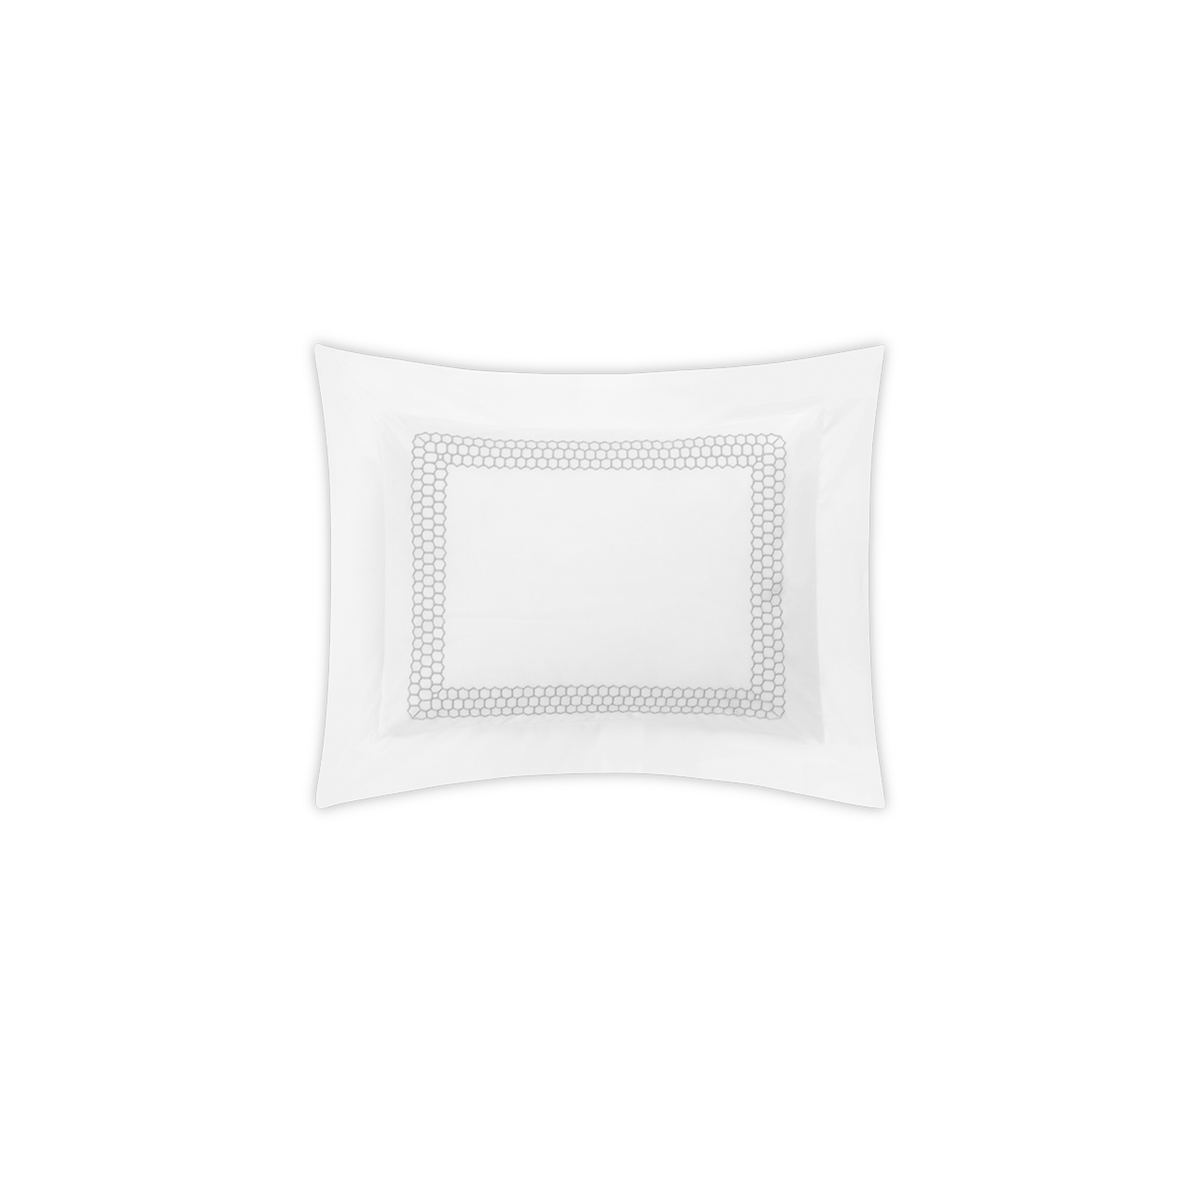 Clear Image of Matouk Liana Bedding Boudoir Sham in Silver Color